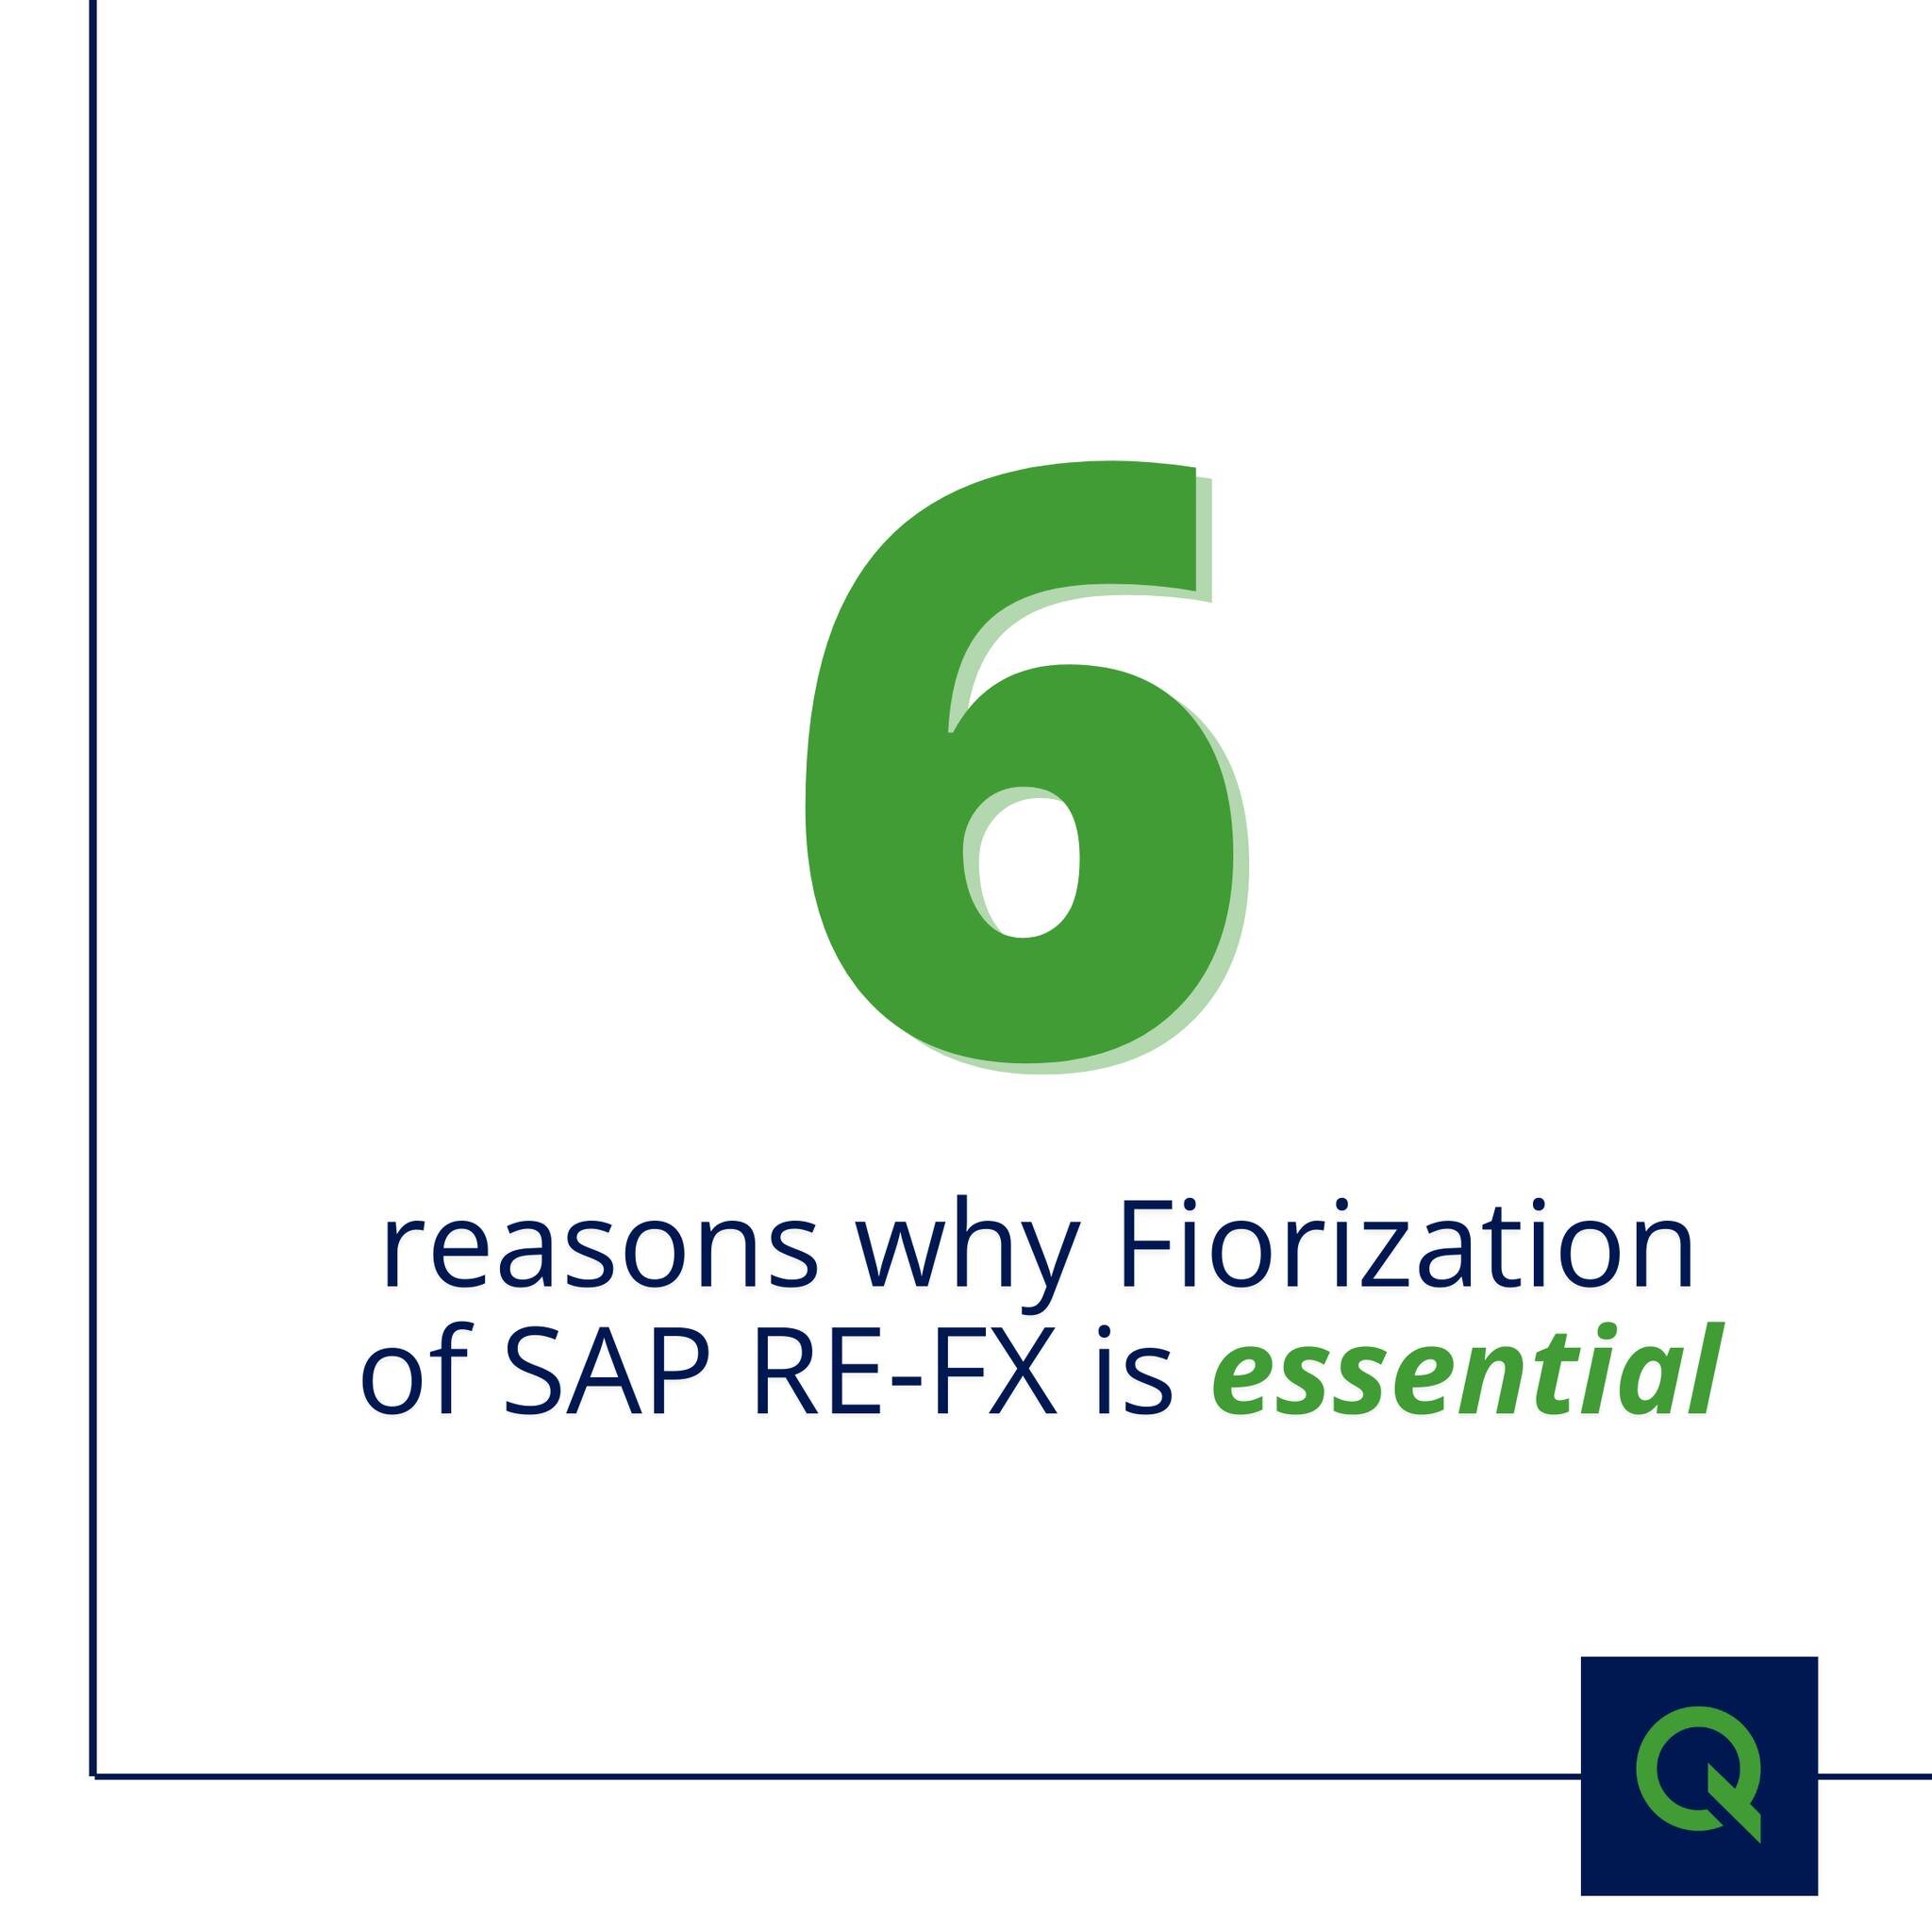 Navigating the Fiorization of SAP RE-FX involves addressing specific challenges and limitations within the existing framework. Meet 6 reasons why it is essential 👇 

▪ Reporting Challenges for Real Estate Managers

▪Automation Gaps in Lease Classifi